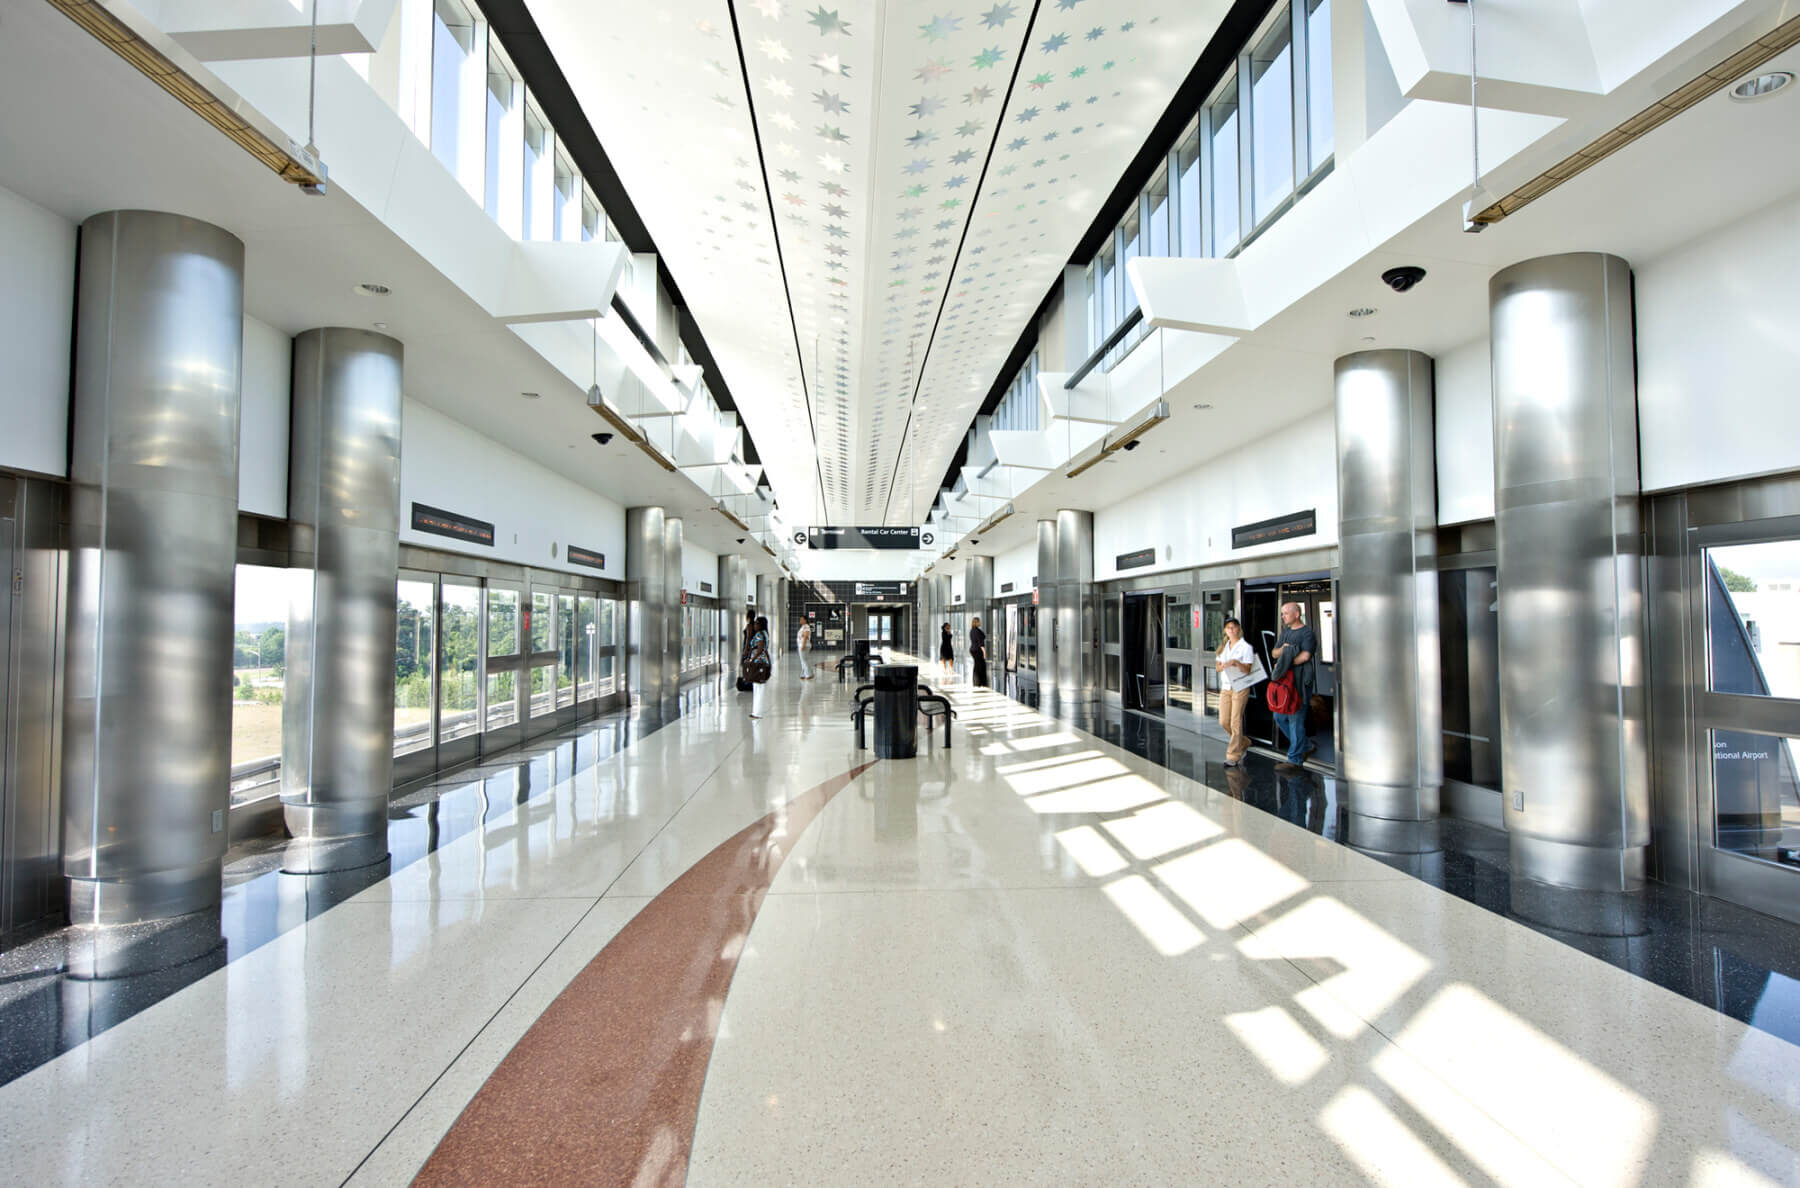 the inside of an automated people mover station at Hartsfield-Jackson Atlanta International Airport